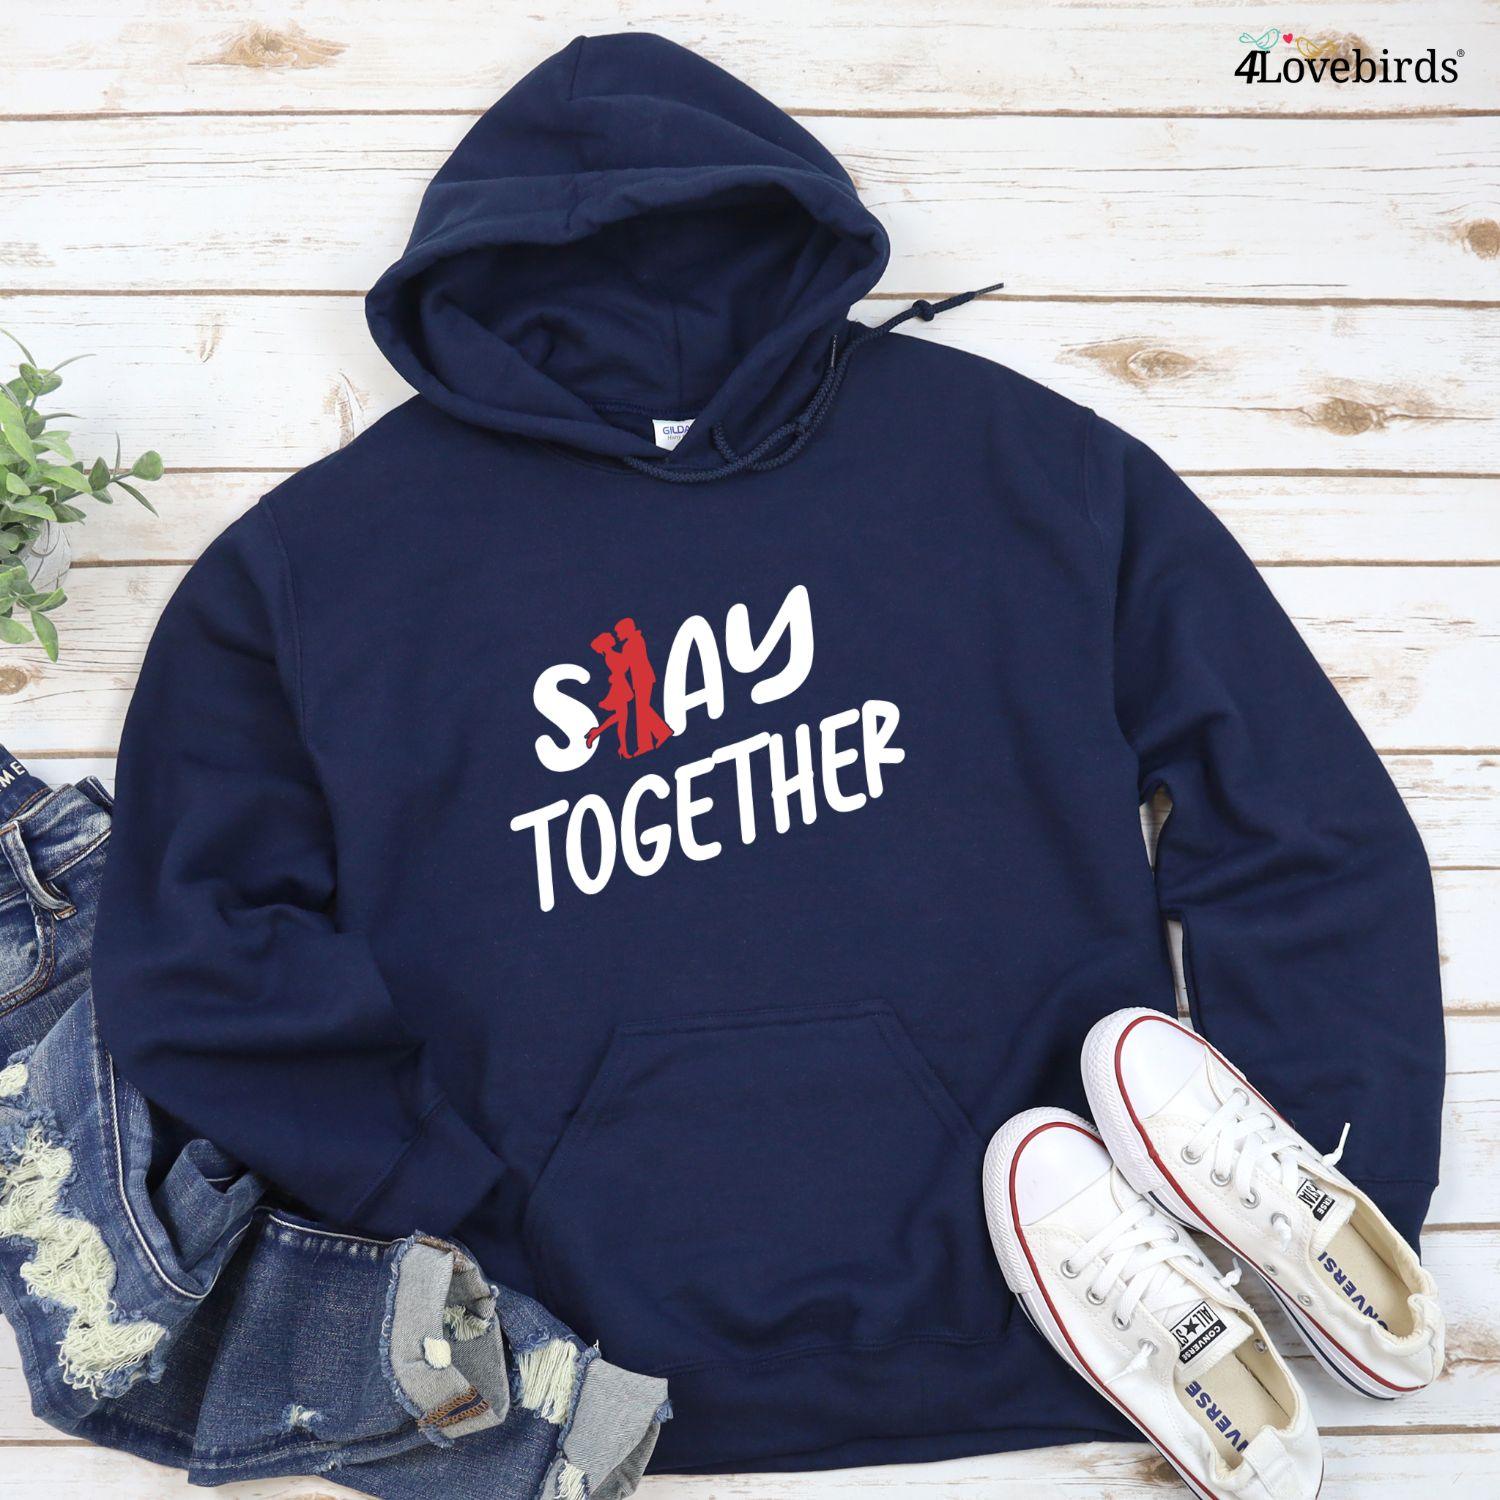 Travel Together & Stay Together - Adorable Couples Matching Set Outfits - 4Lovebirds